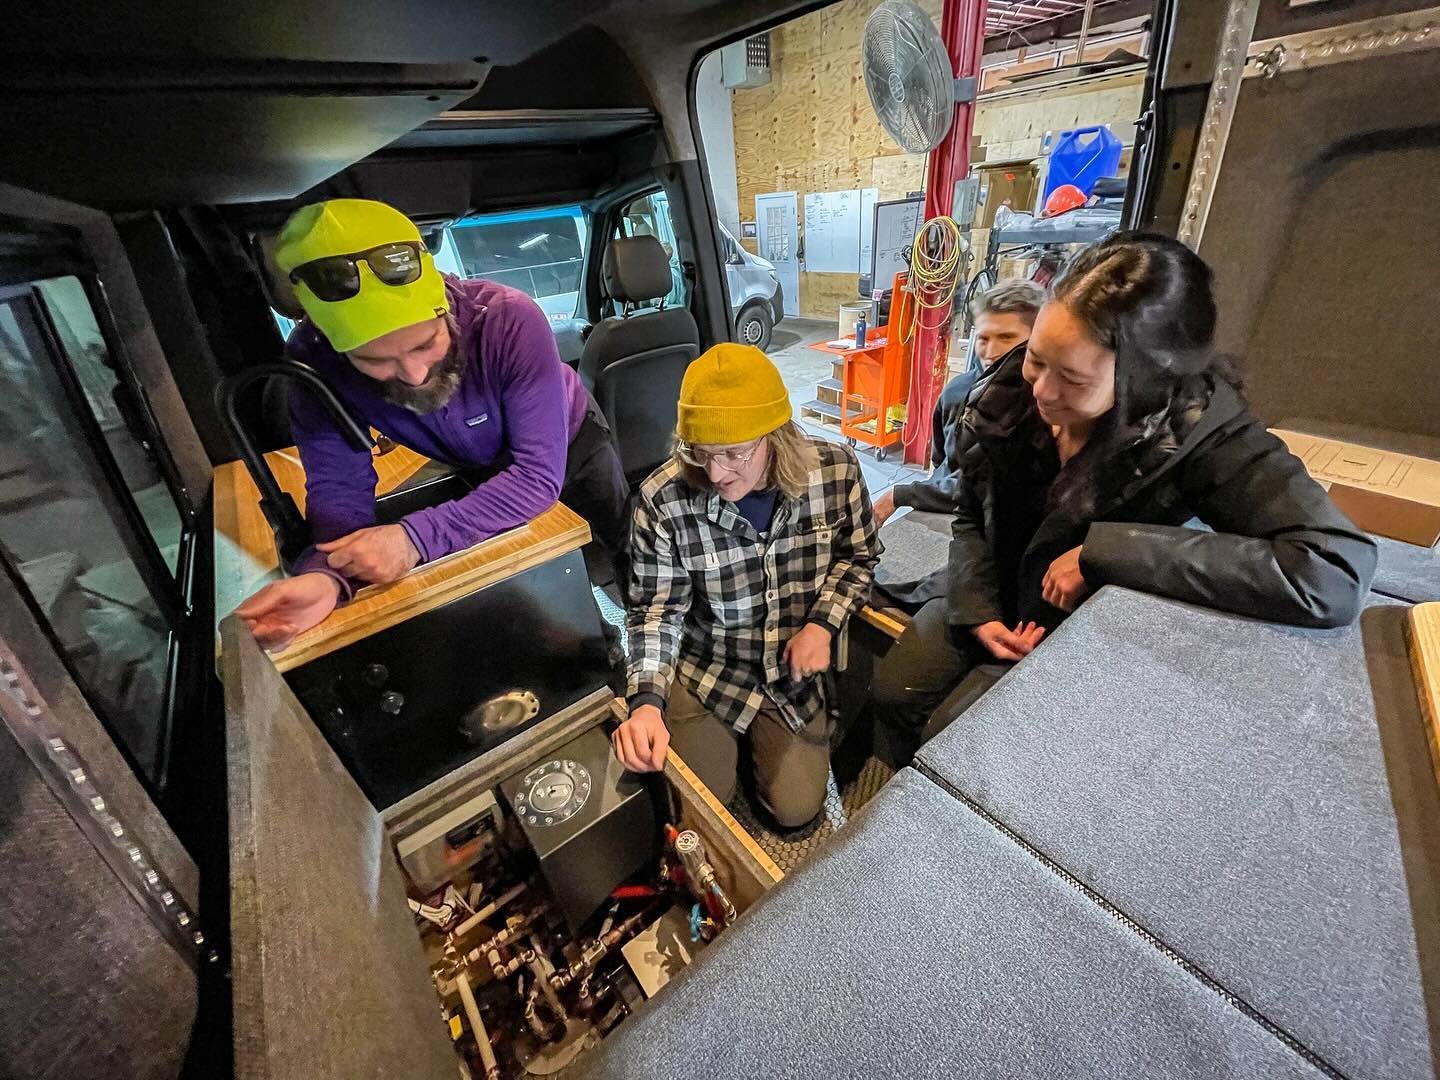 Nirvana Upfitters team member Justin providing an overview a VLT system 🔥 to the van owners of the Mugs Mobile 🦮🚐 
From the day a van is delivered we strive to ensure ease of access and serviceability for all systems to keep you on the road for th